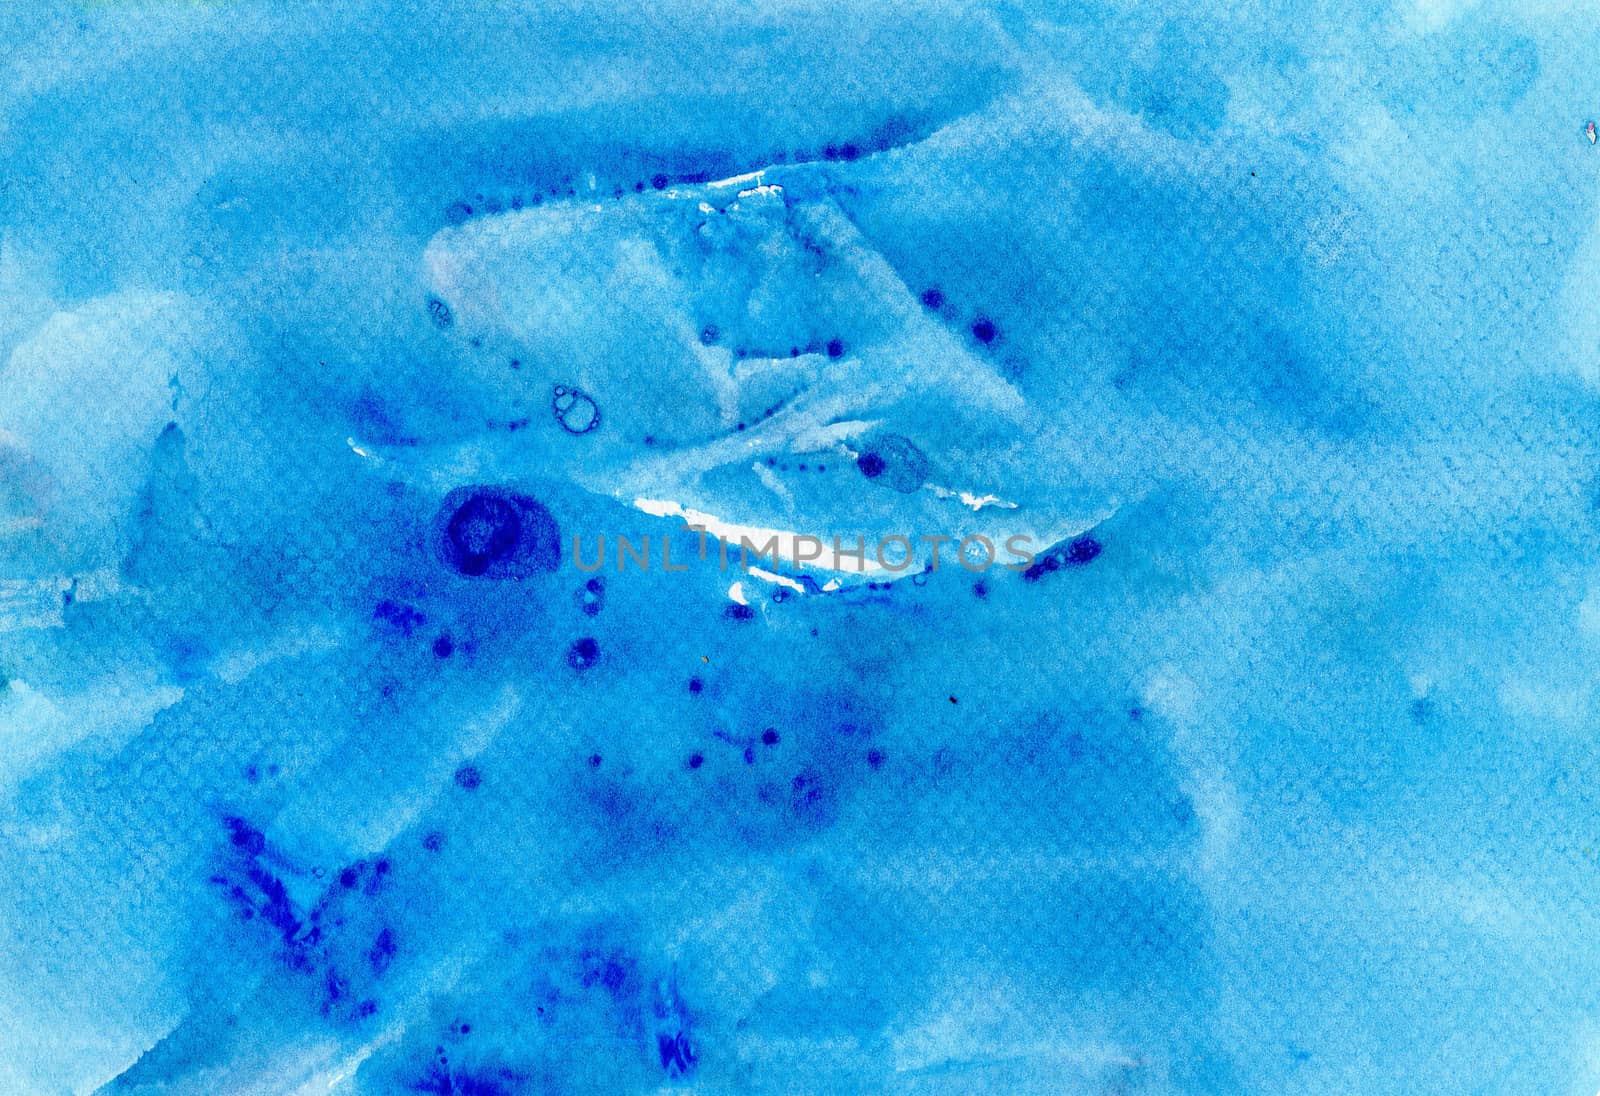 Abstract background of watercolor on paper texture, hand painted in blue